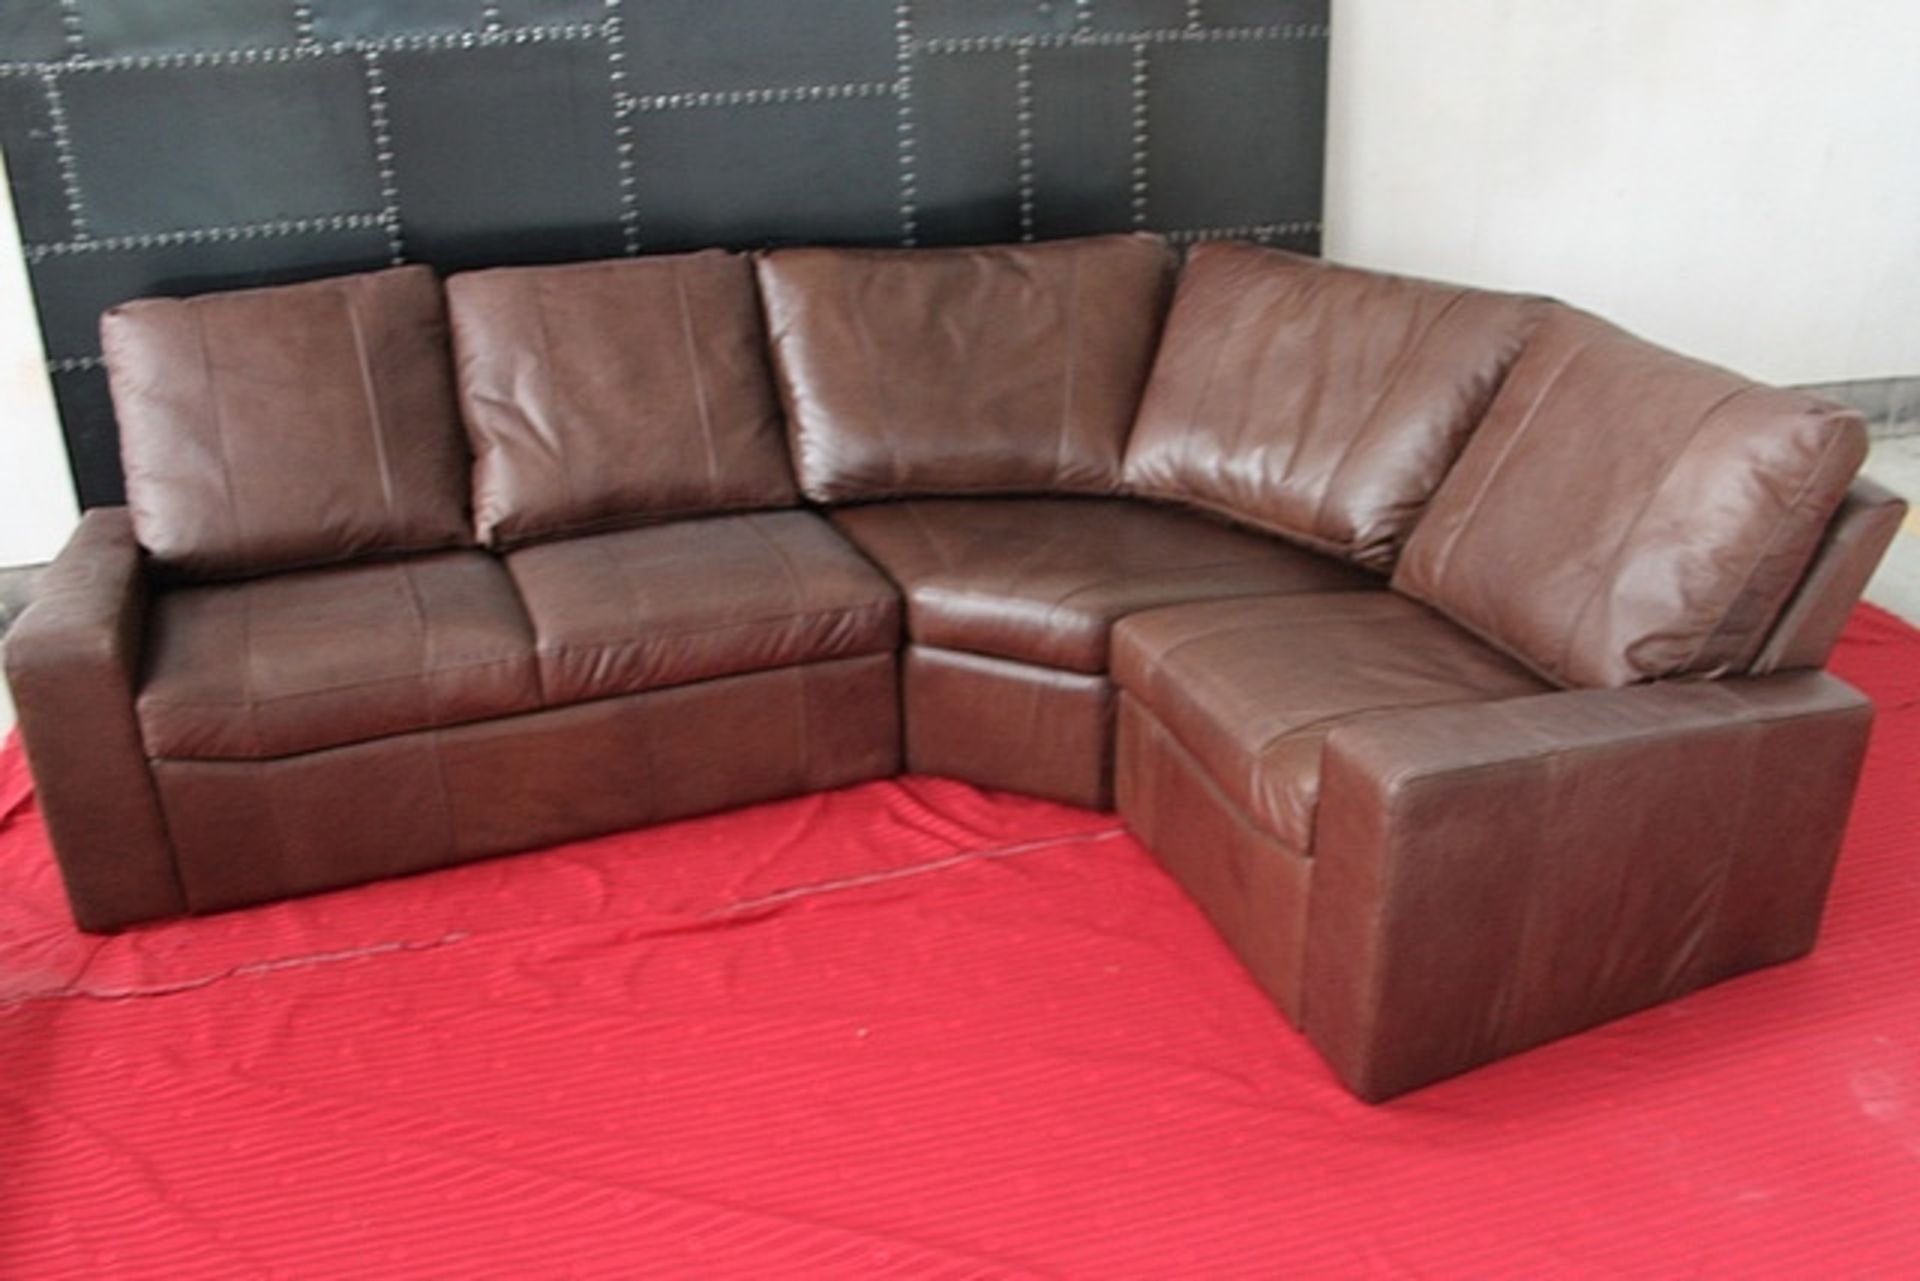 Crosby Leather Sectional Suite Comprising Of Corner Nap.Choco 171x106x88cm RRP £ 2637, Sectional - Image 2 of 8